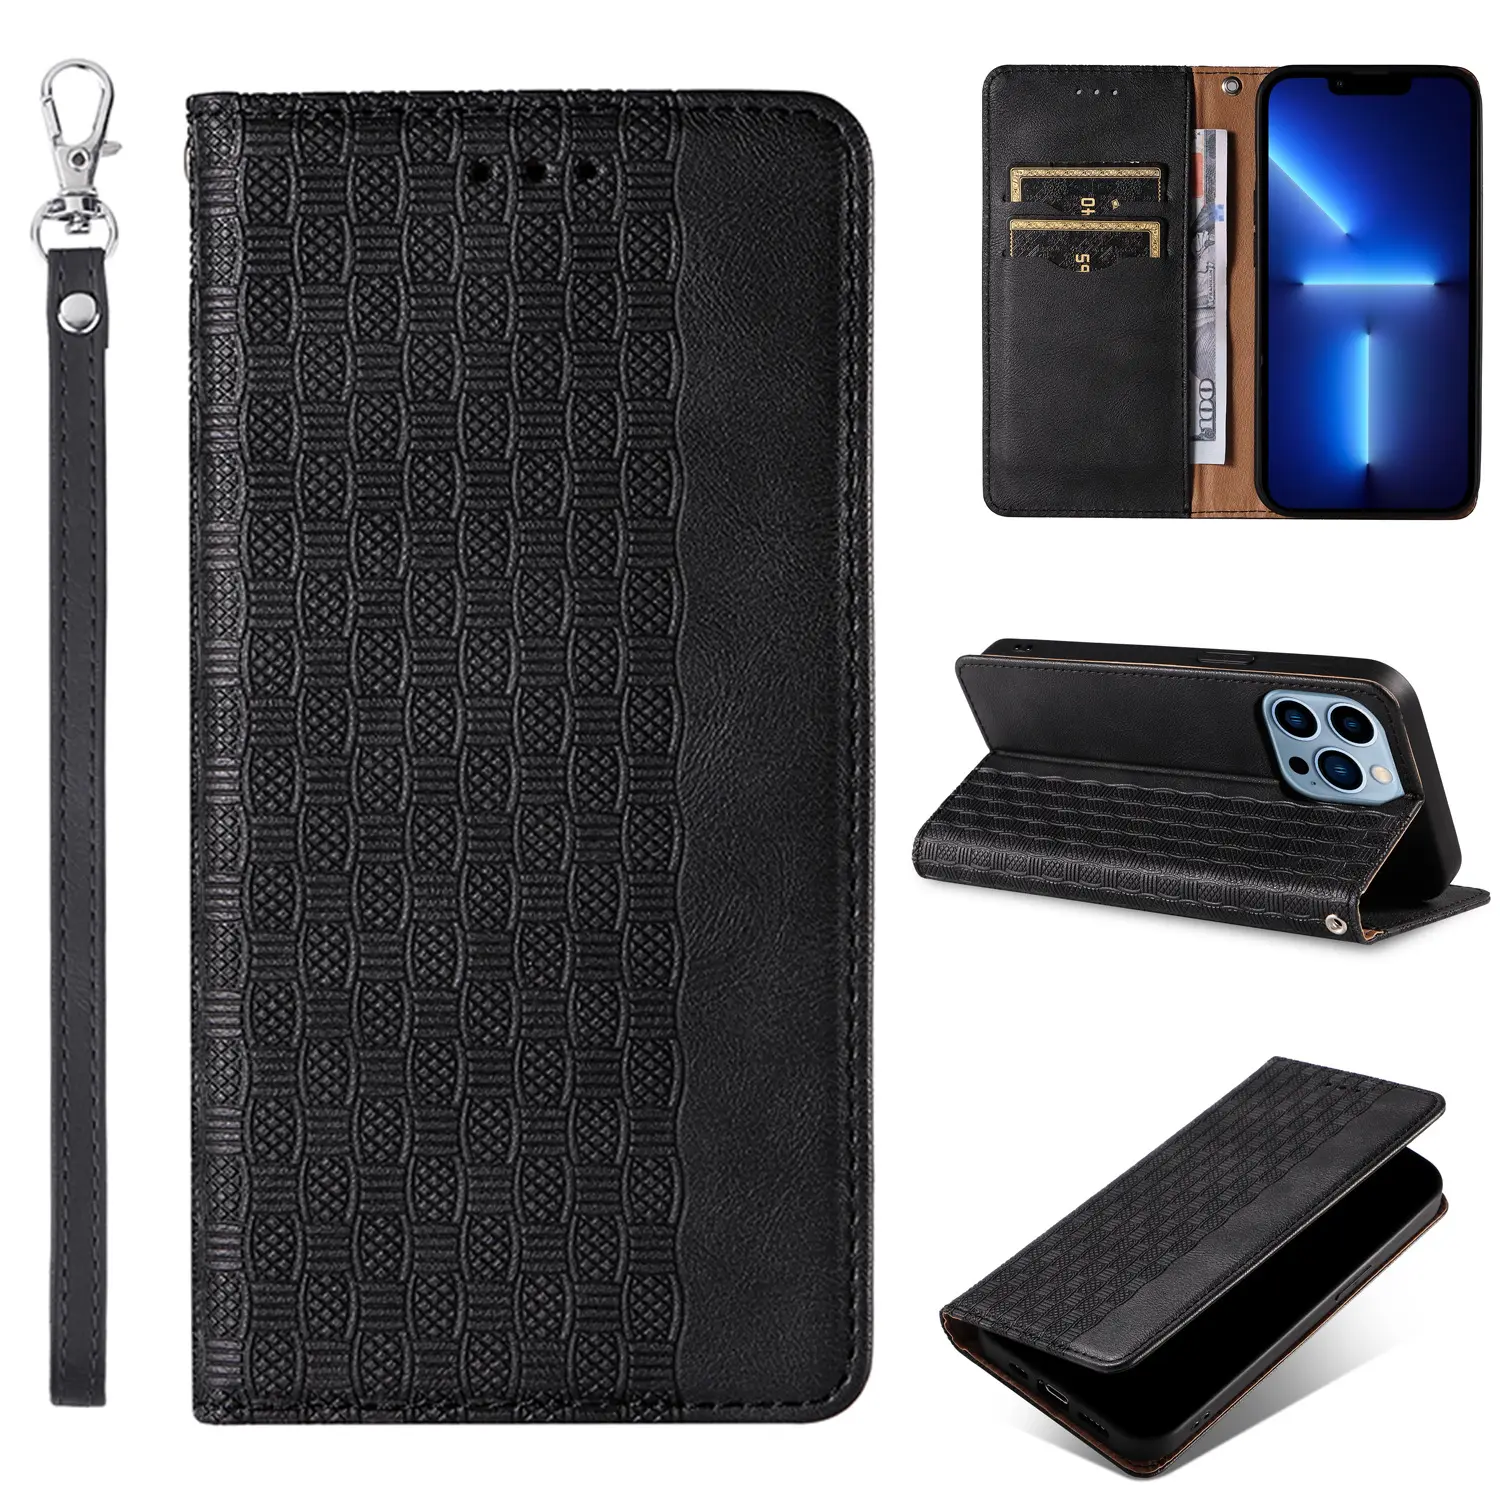 Embossed PU Leather Wallet Magnet Flip Case With Wristband Strap Mobile Case Leather Cover For IP hone 13 14 15 Pro Plus